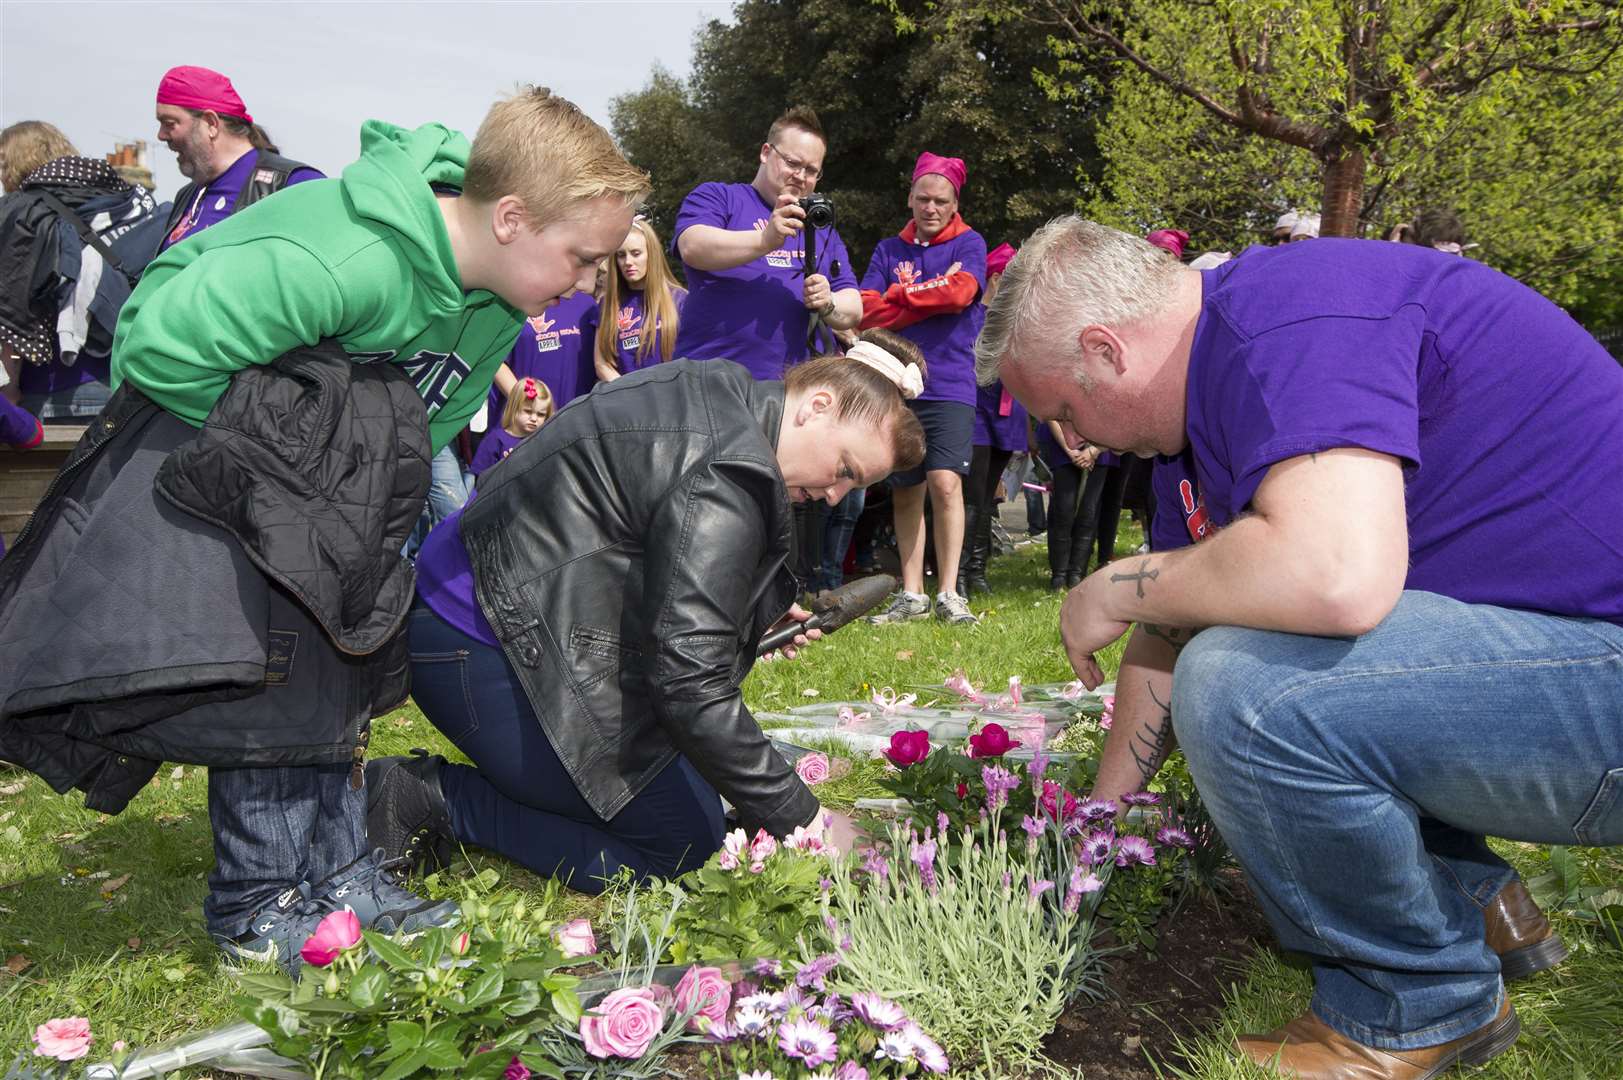 Watched by Stacey's brother Jake, mum Samantha Mowle and dad Warren Mowle plant roses in her memorial garden